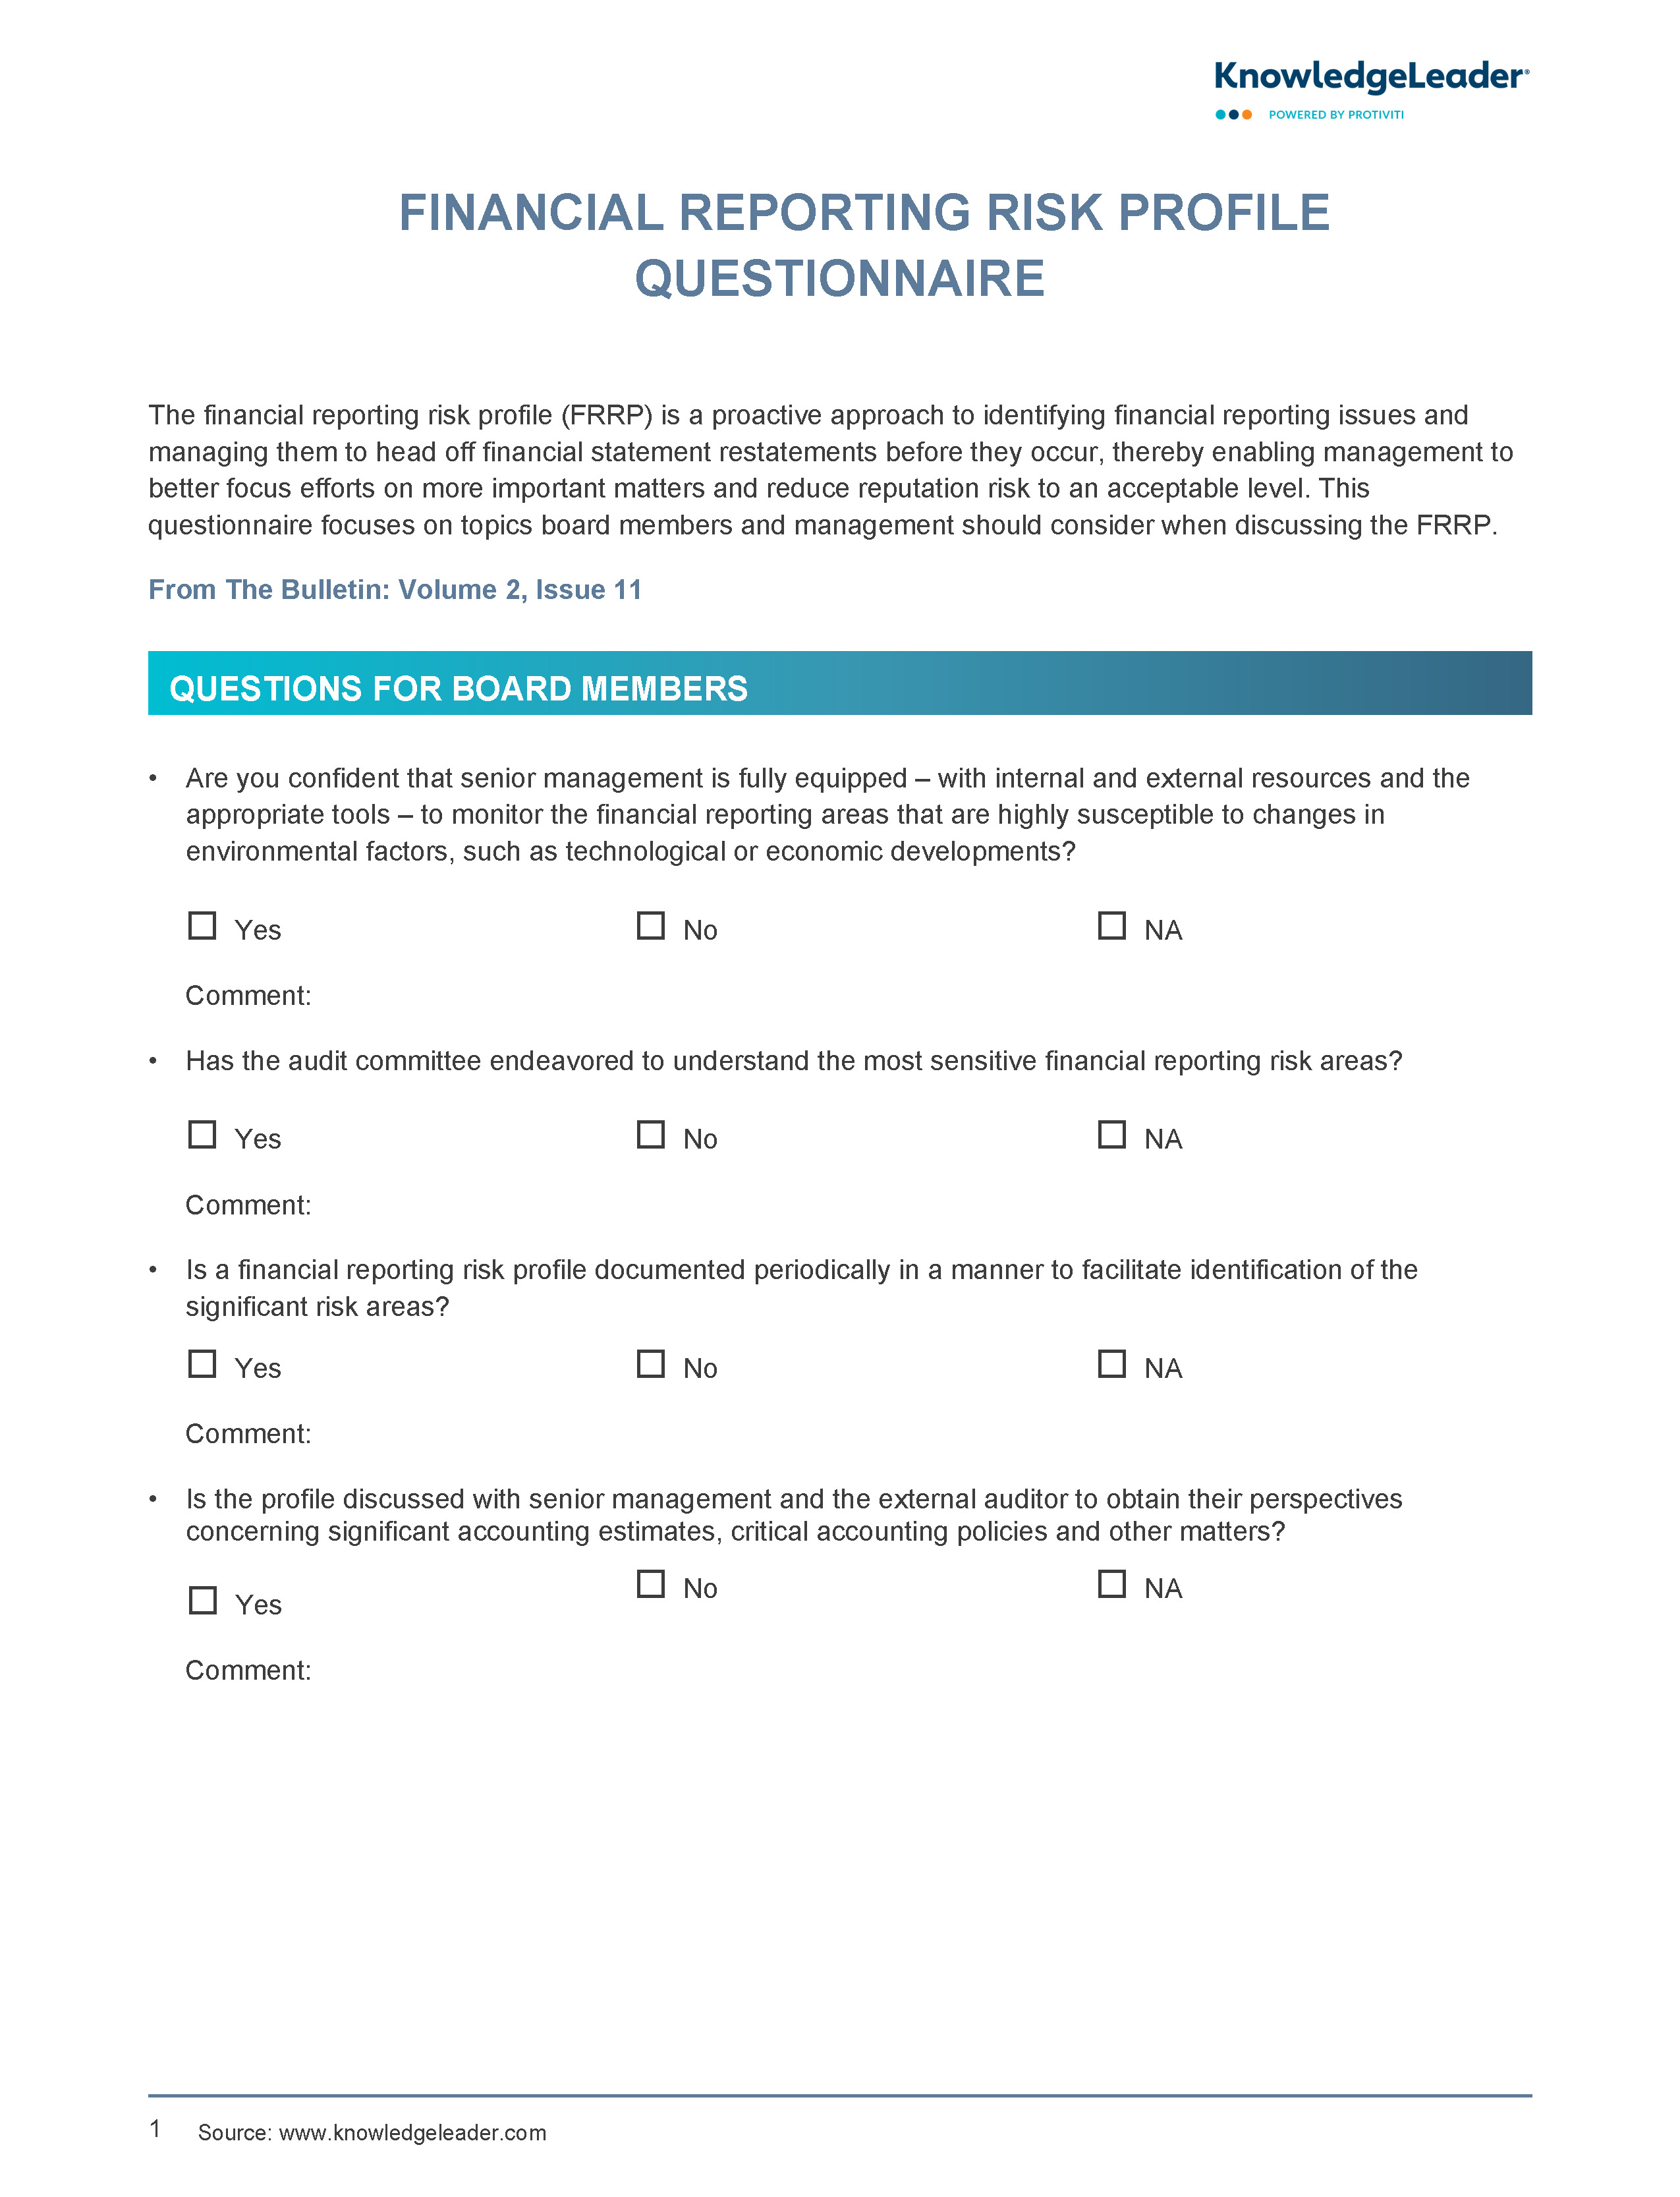 Screenshot of the first page of Financial Reporting Risk Profile Questionnaire